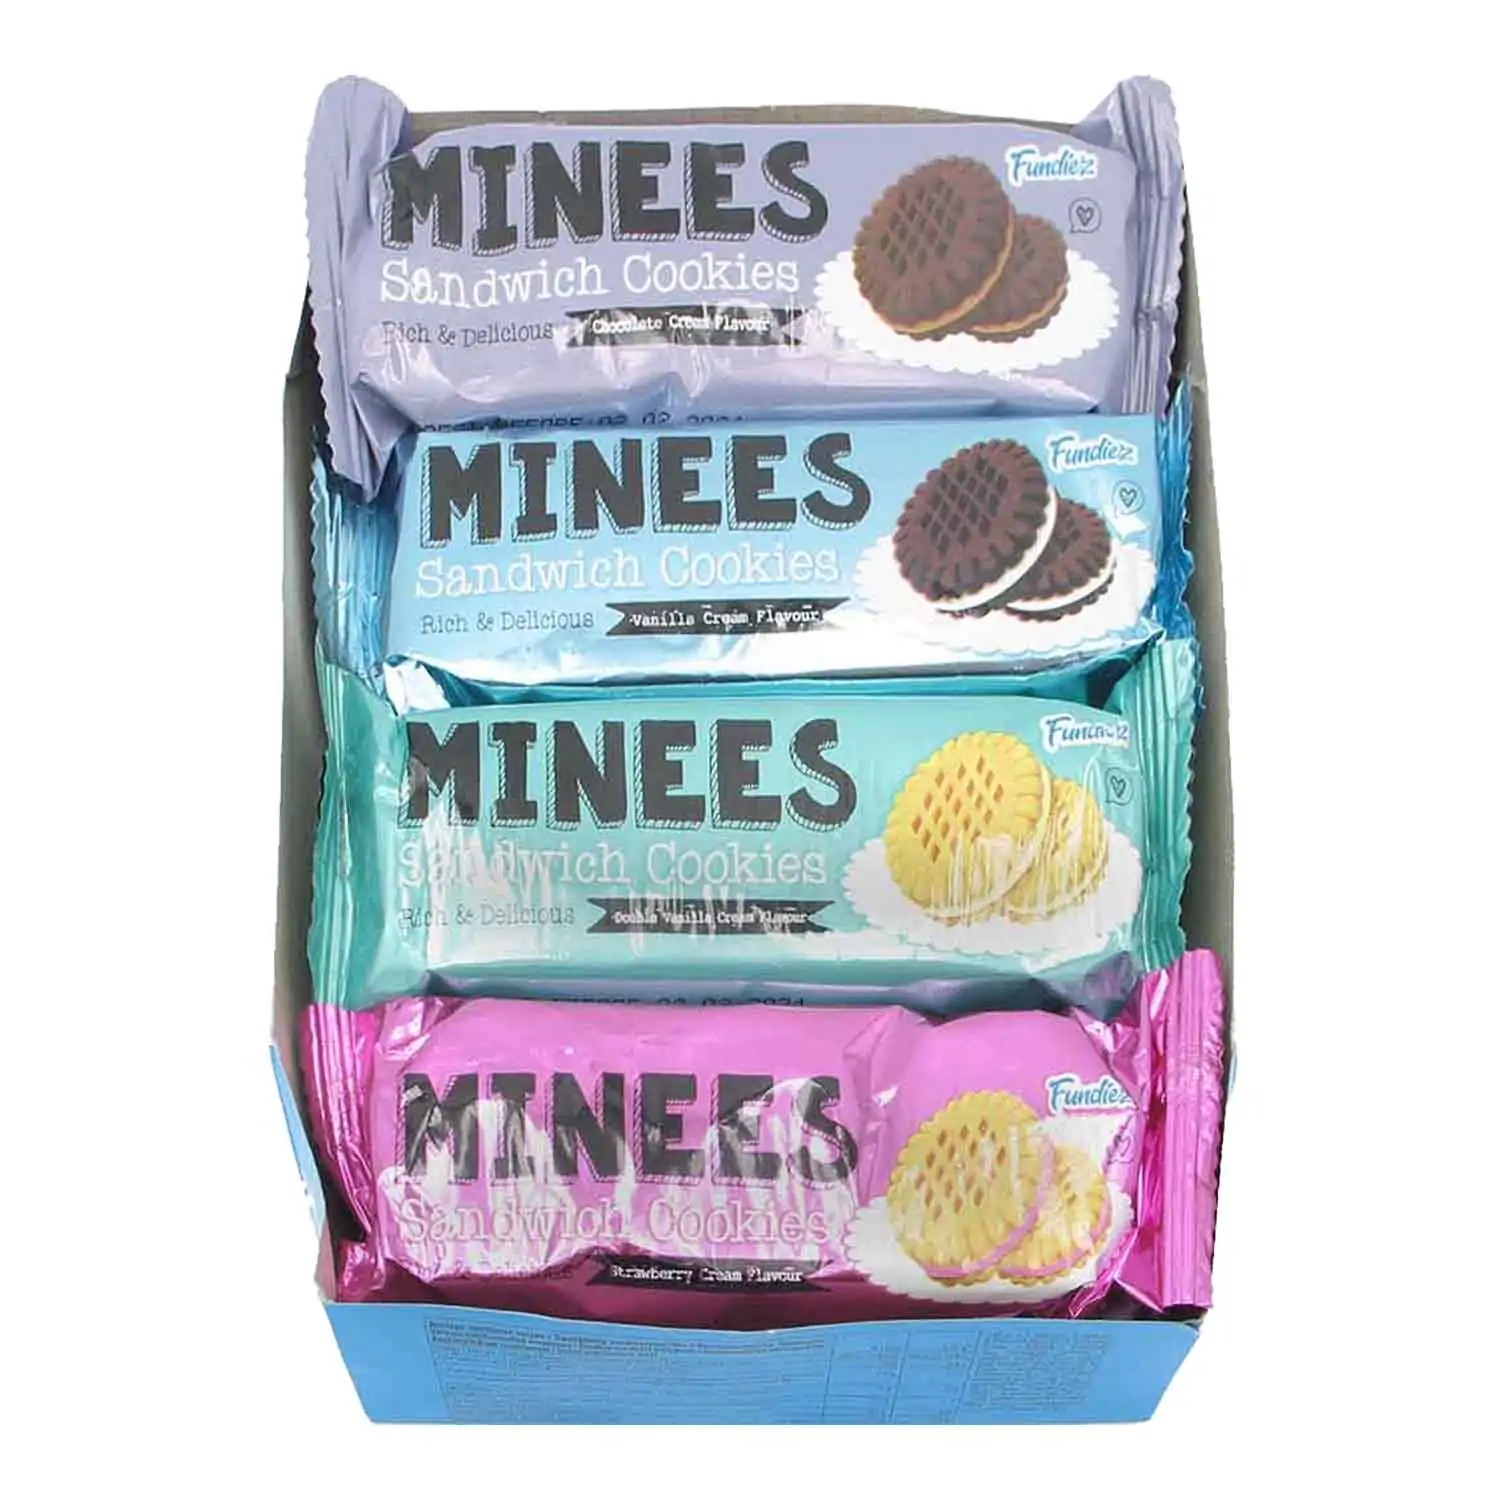 Minees sandwich cookies 8x30g - Buy at Real Tobacco